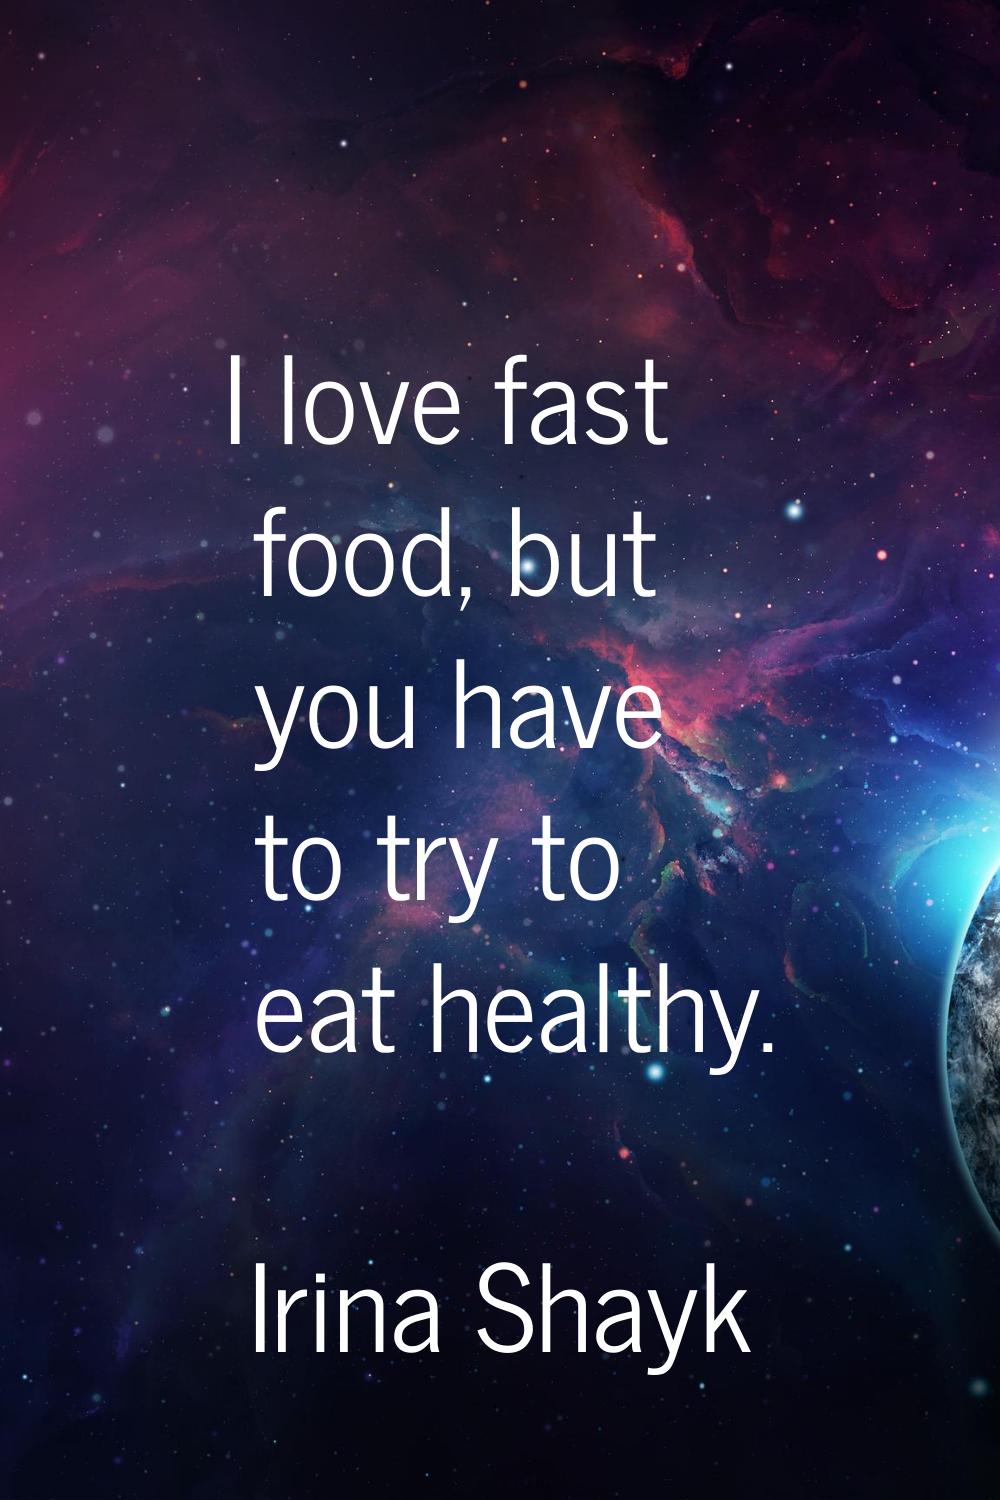 I love fast food, but you have to try to eat healthy.